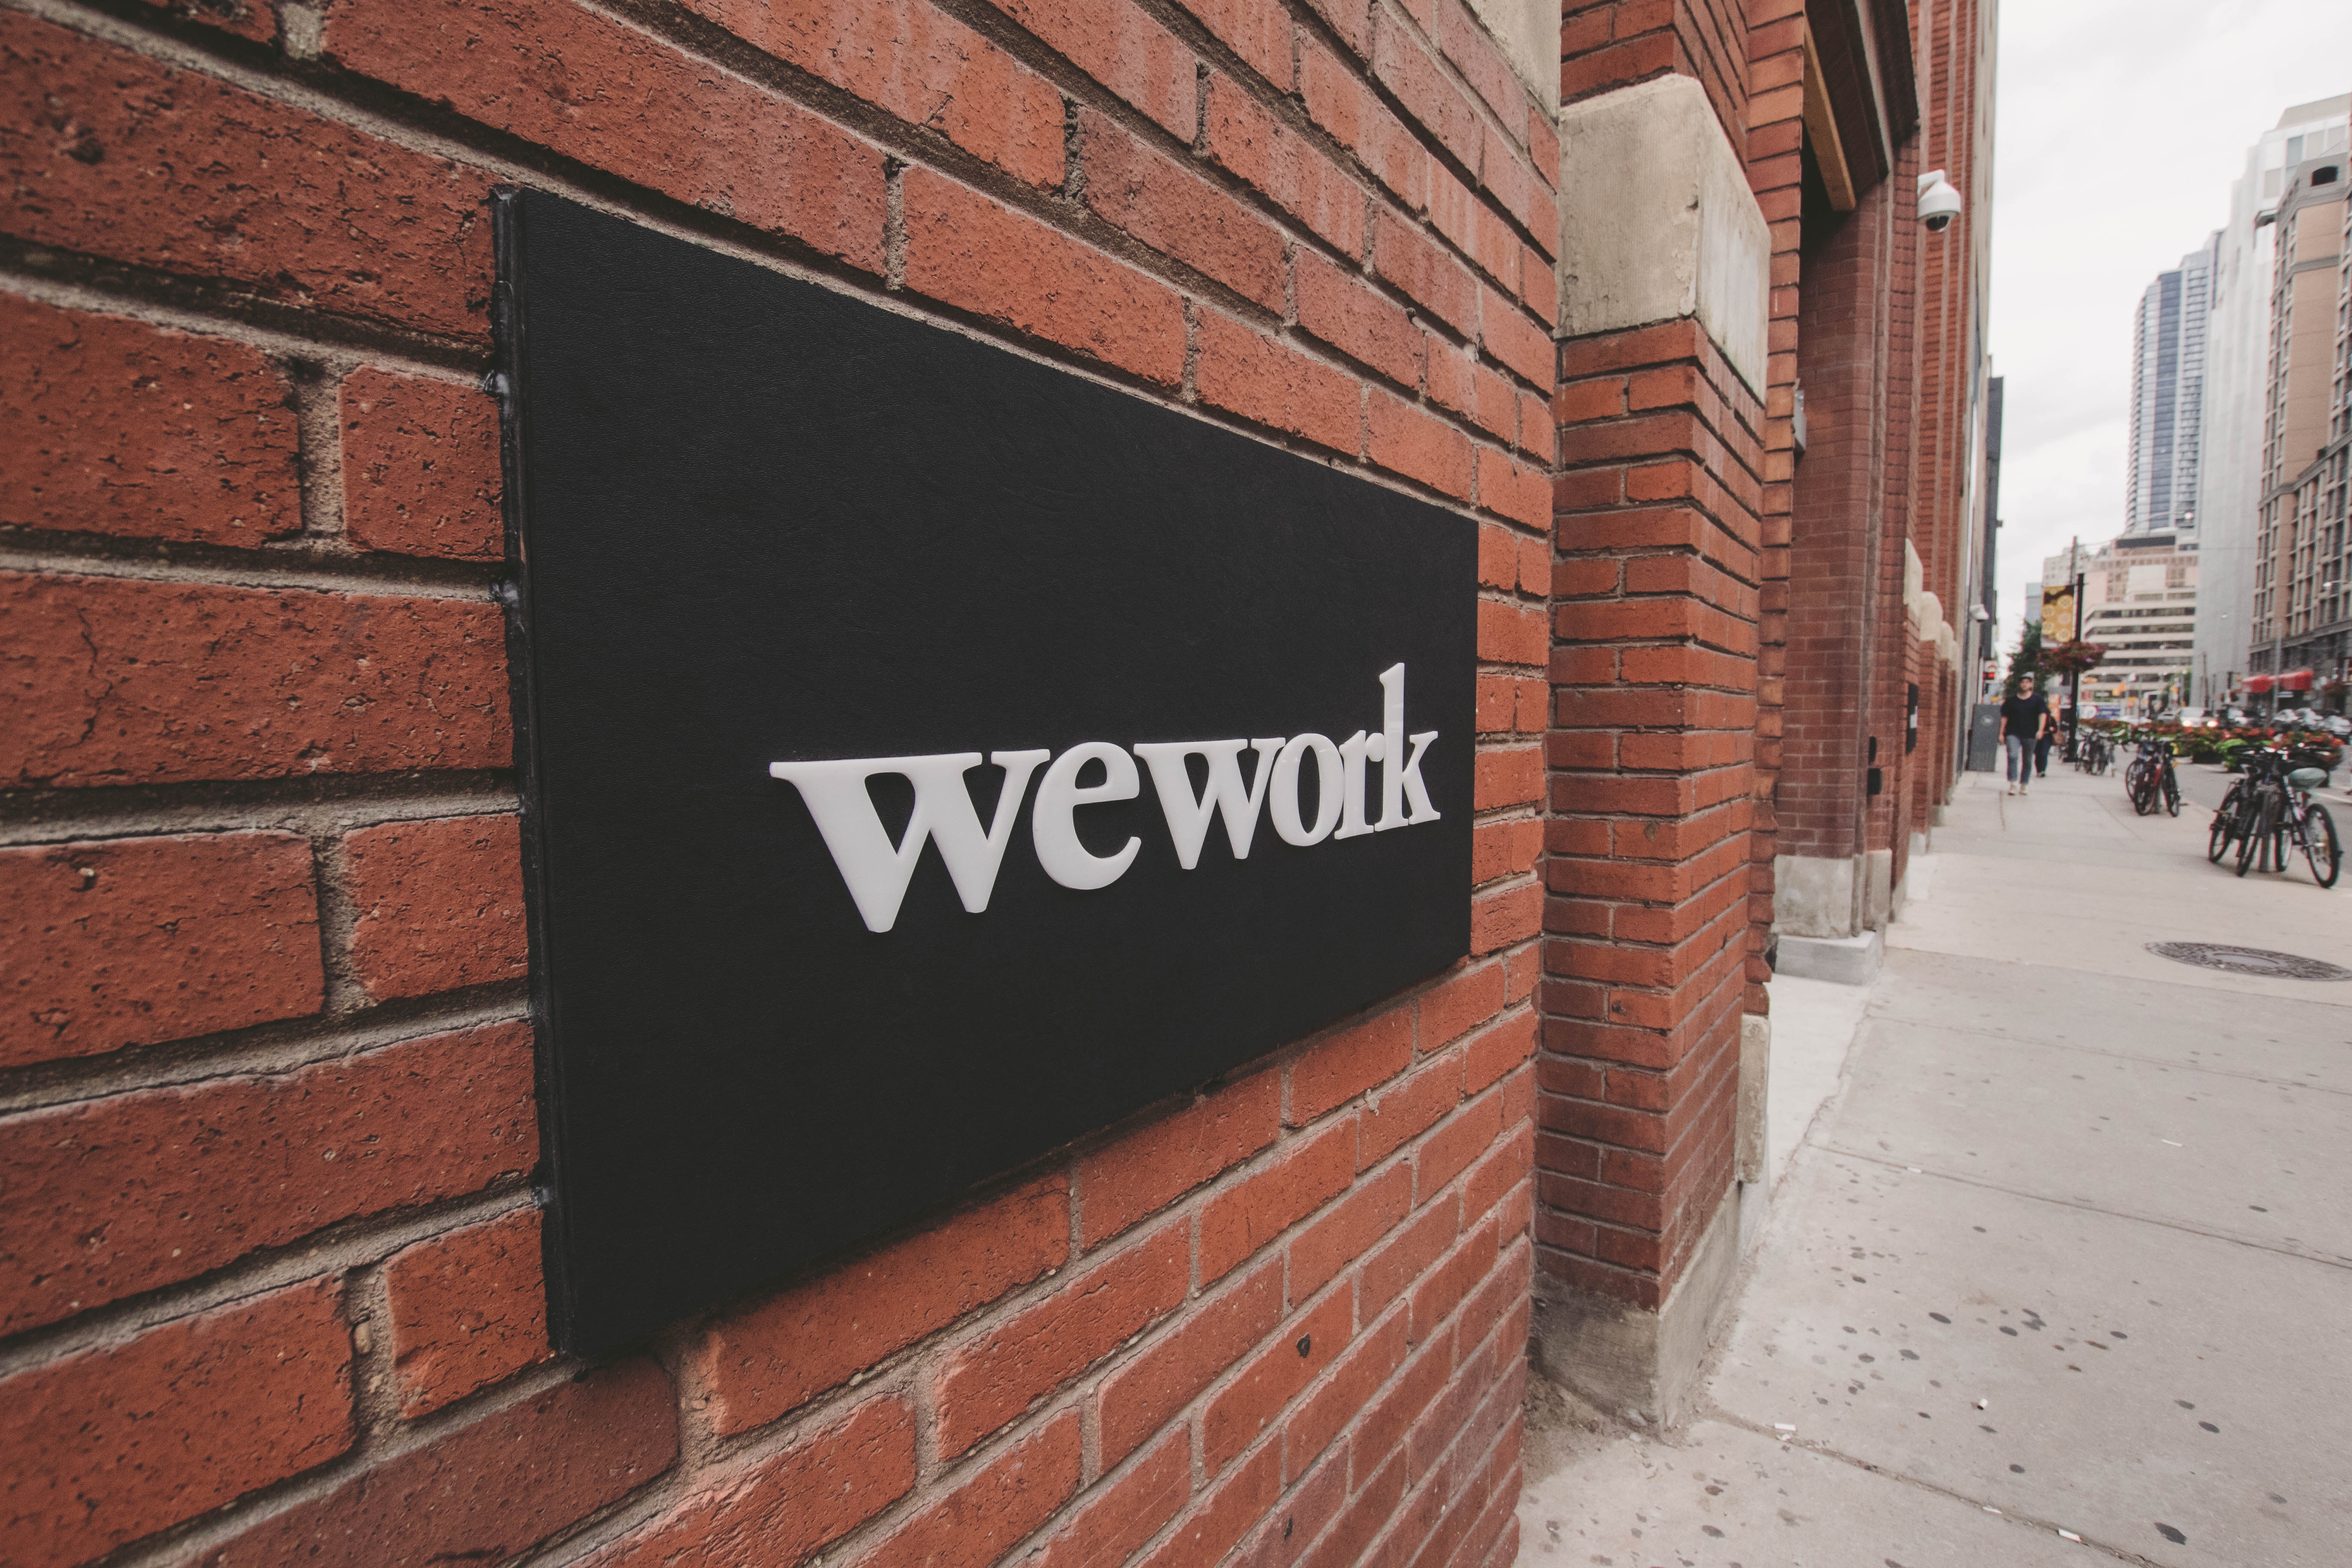 WeWork India wants to raise funds, expand and turn profitable, despite parent’s IPO debacle